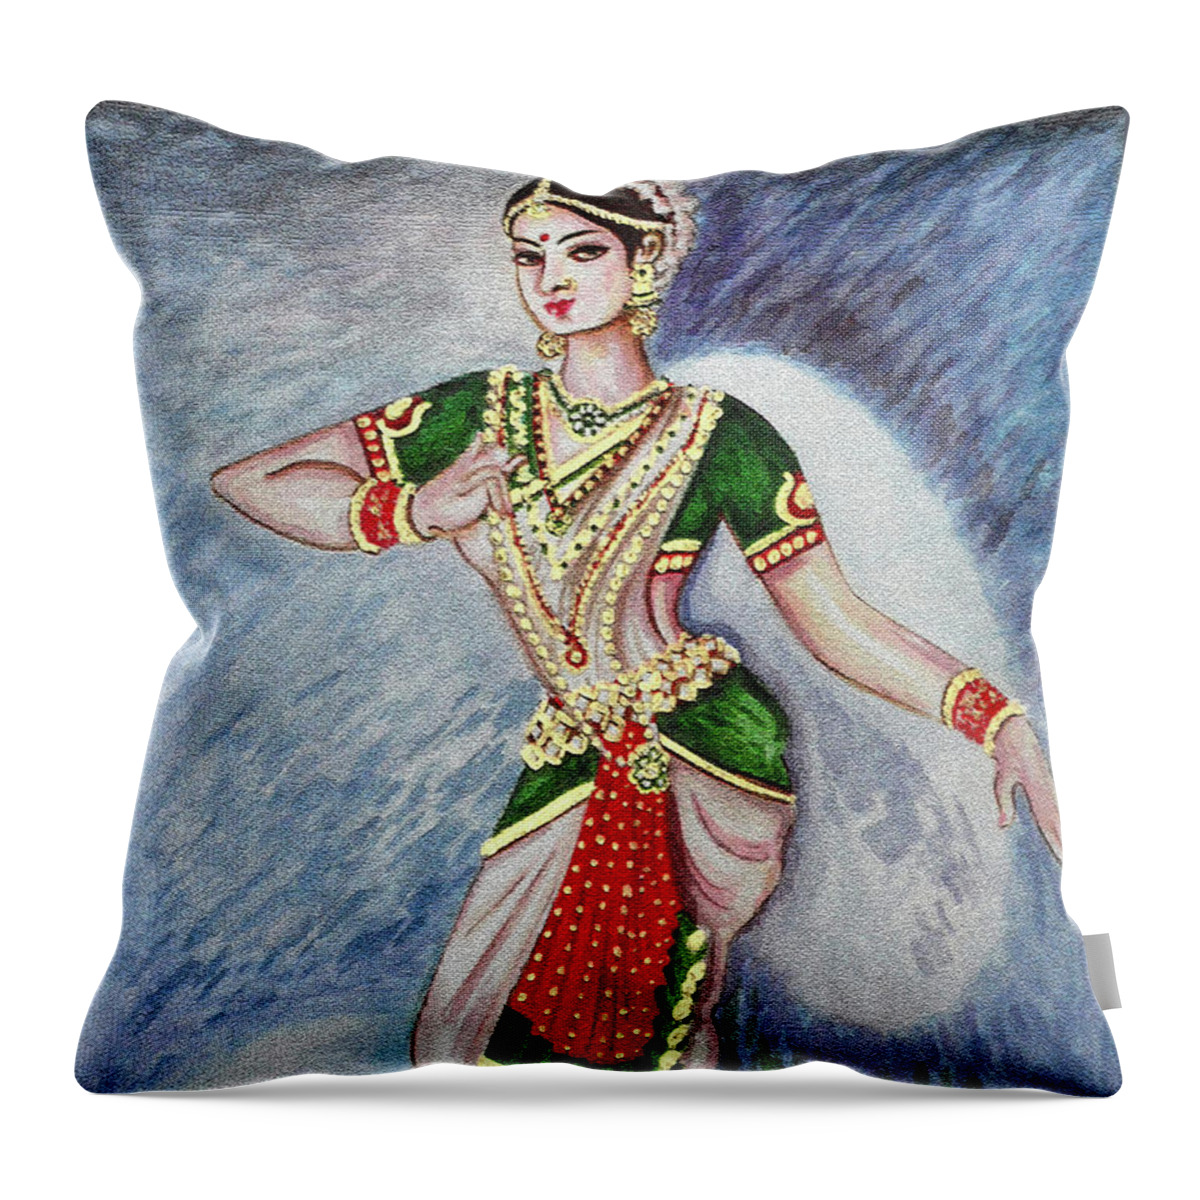 Dance Throw Pillow featuring the painting Dance 2 by Harsh Malik